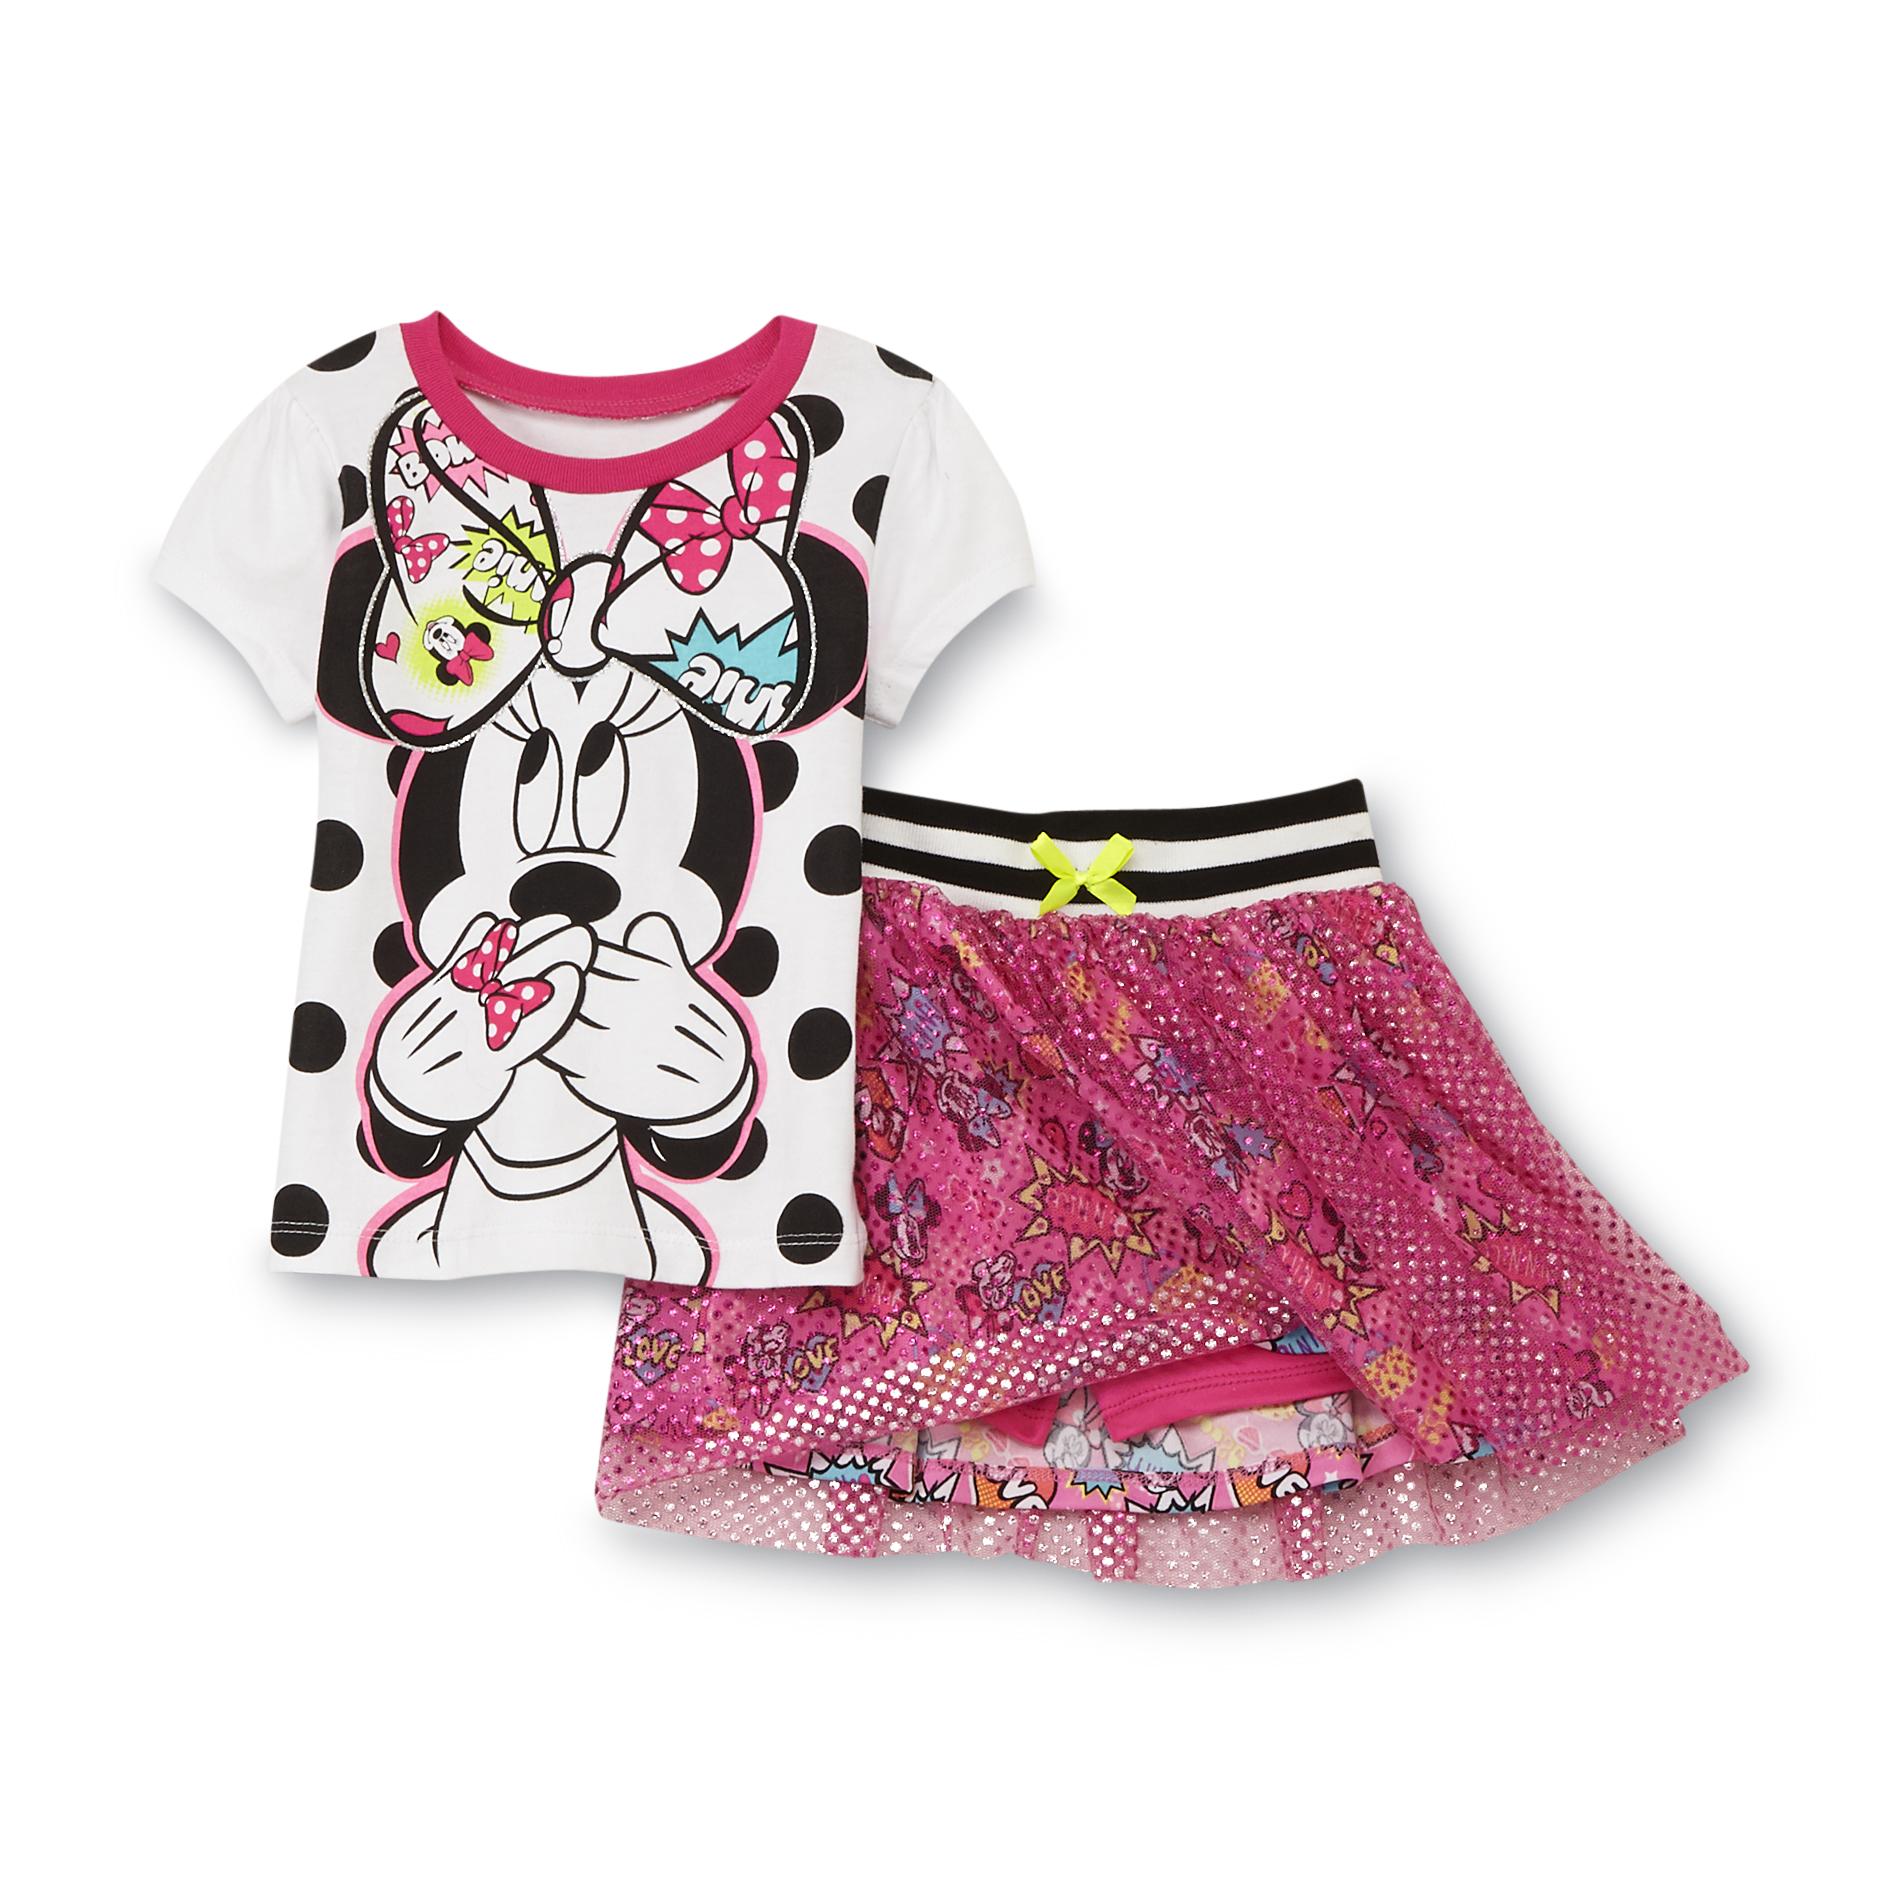 Disney Minnie Mouse Infant & Toddler Girl's Shirt & Scooter Skirt